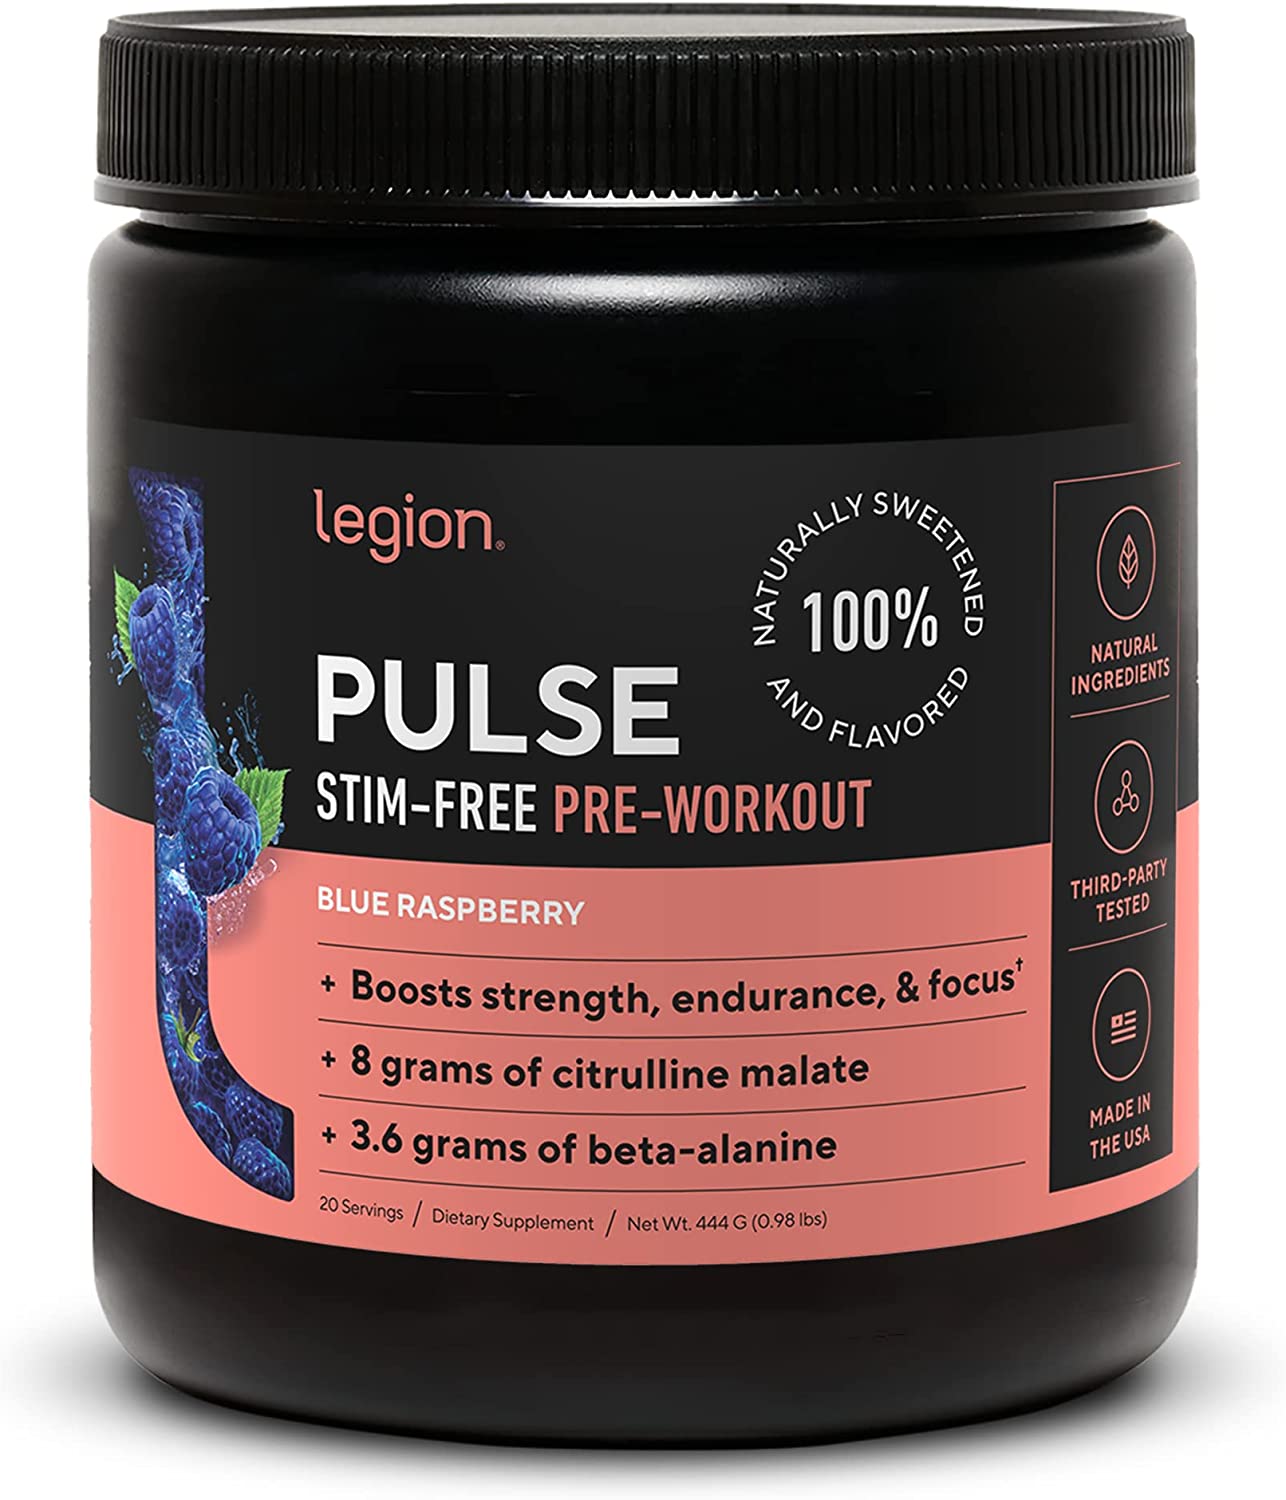 Pulse Stim-Free Pre-Workout for Anxiety